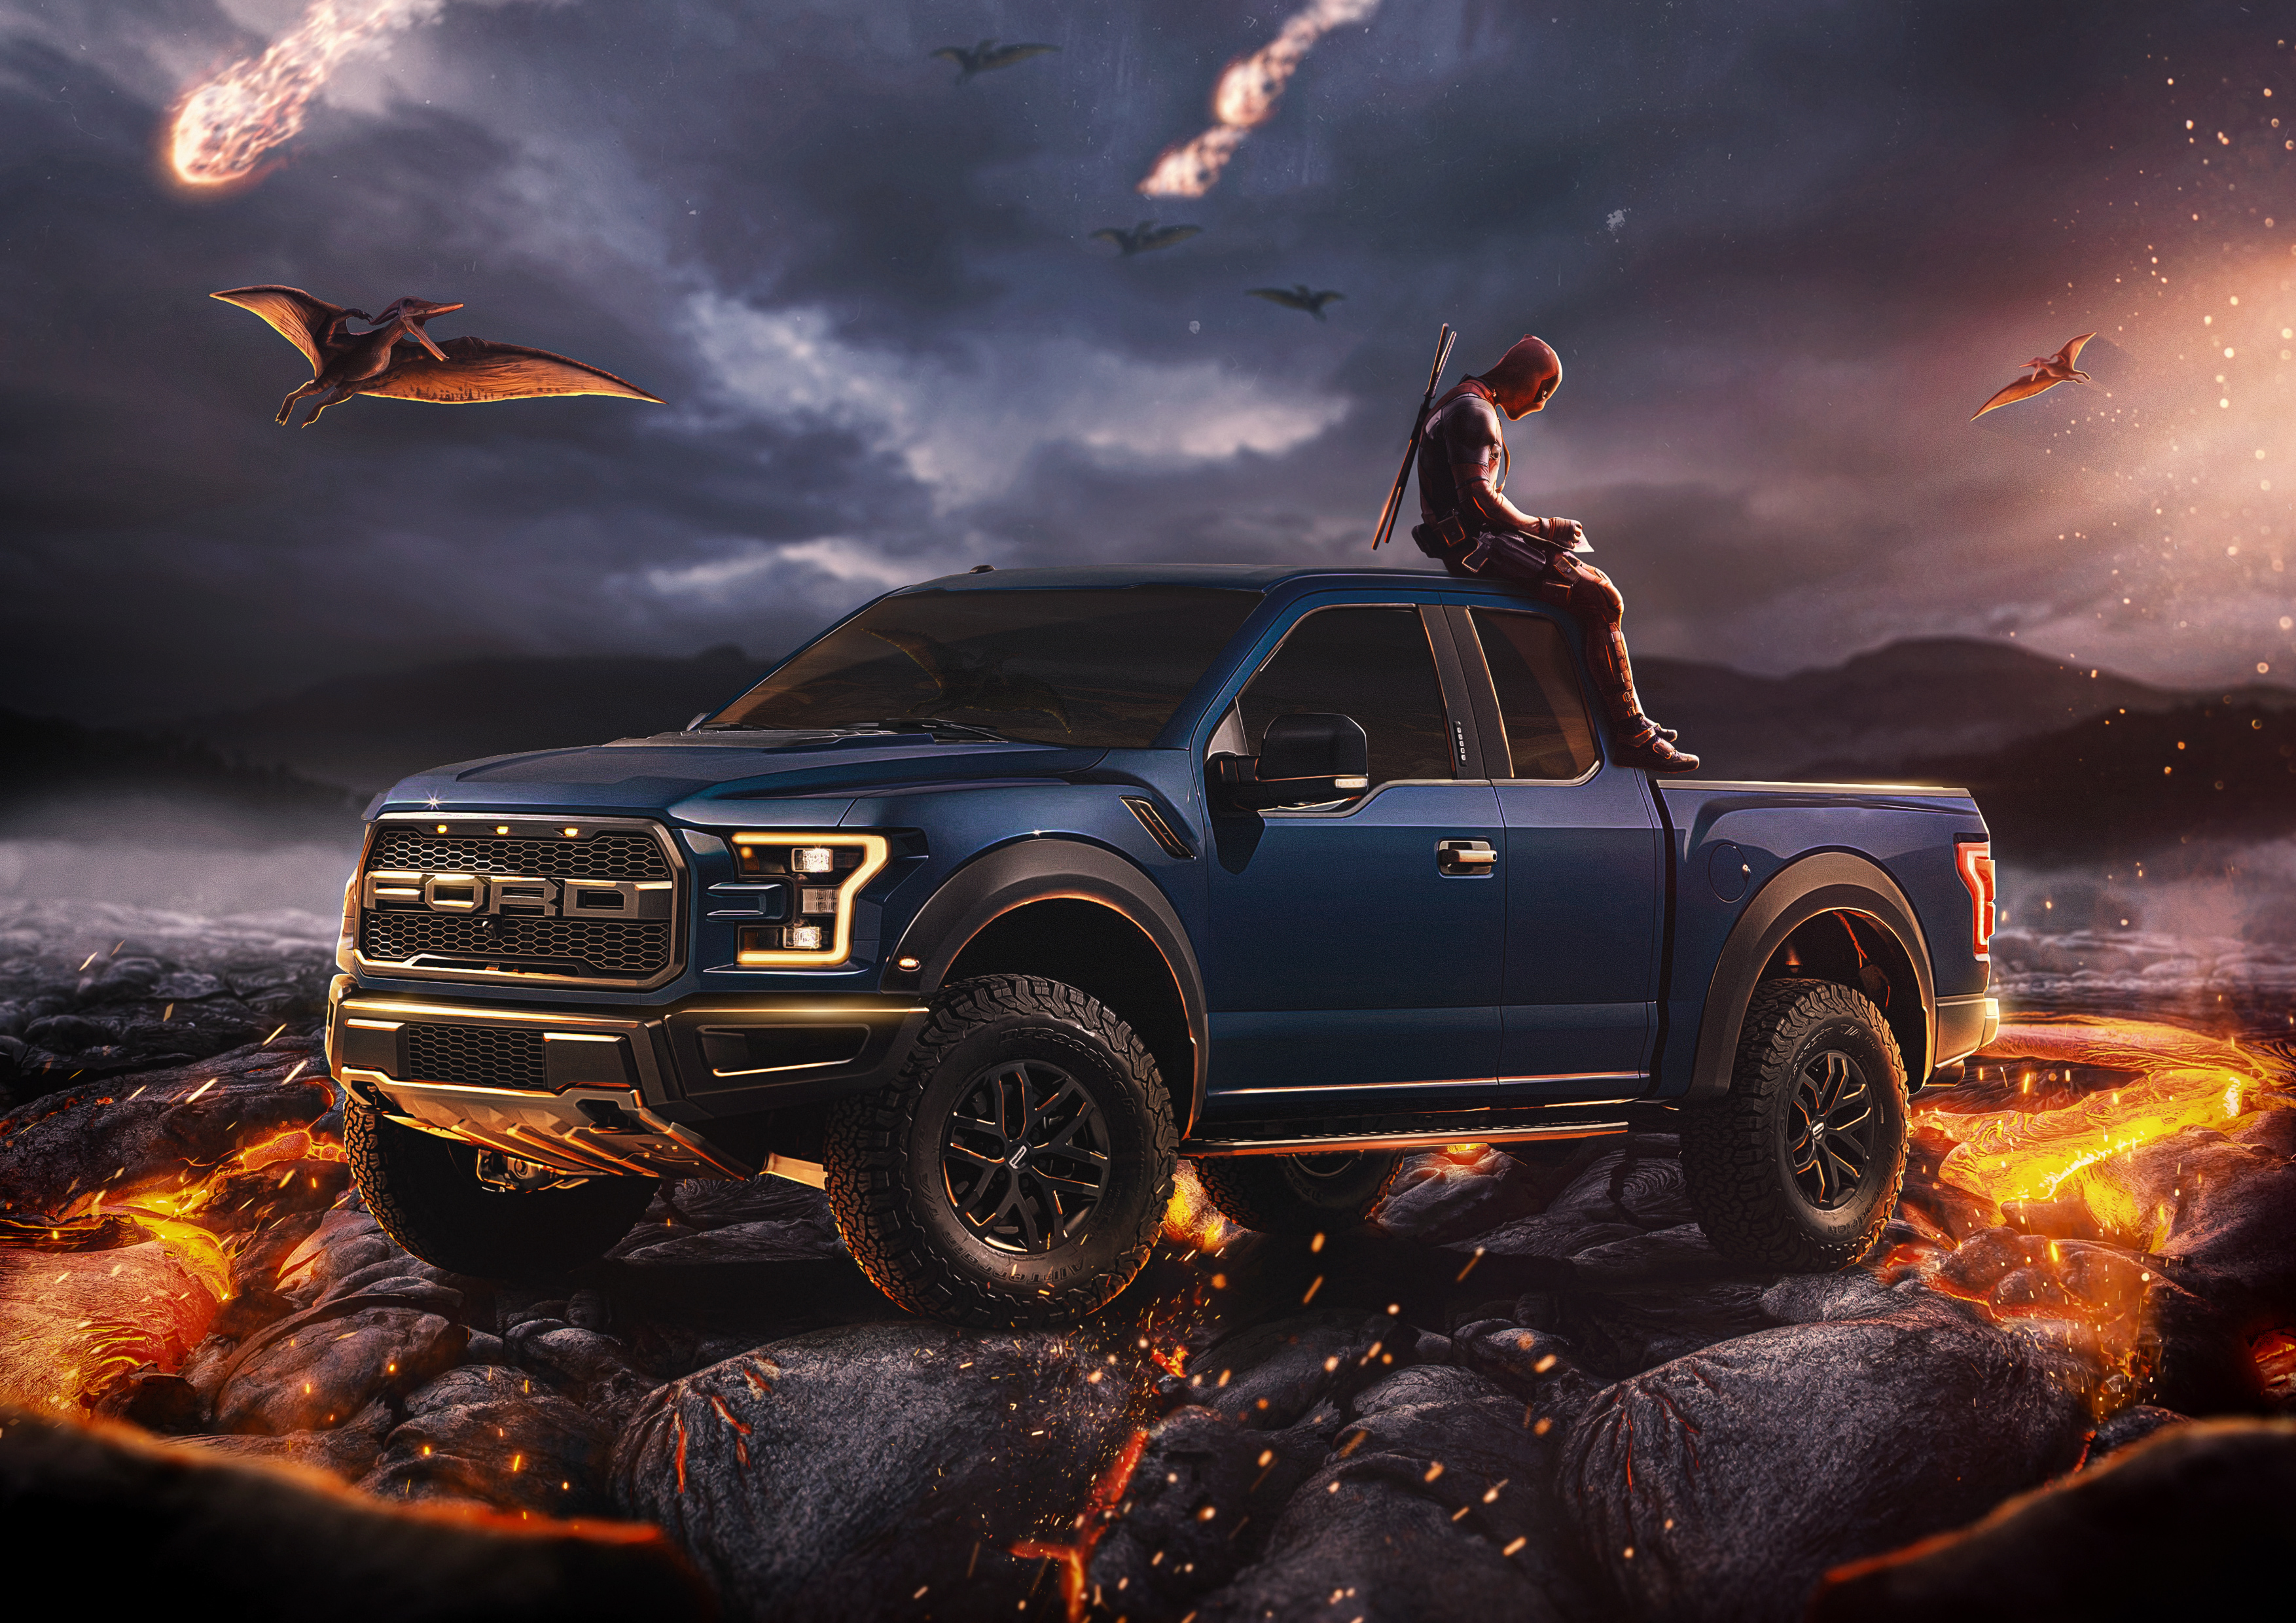 Ford F 150 Hd Wallpaper Background Image 3508x2480